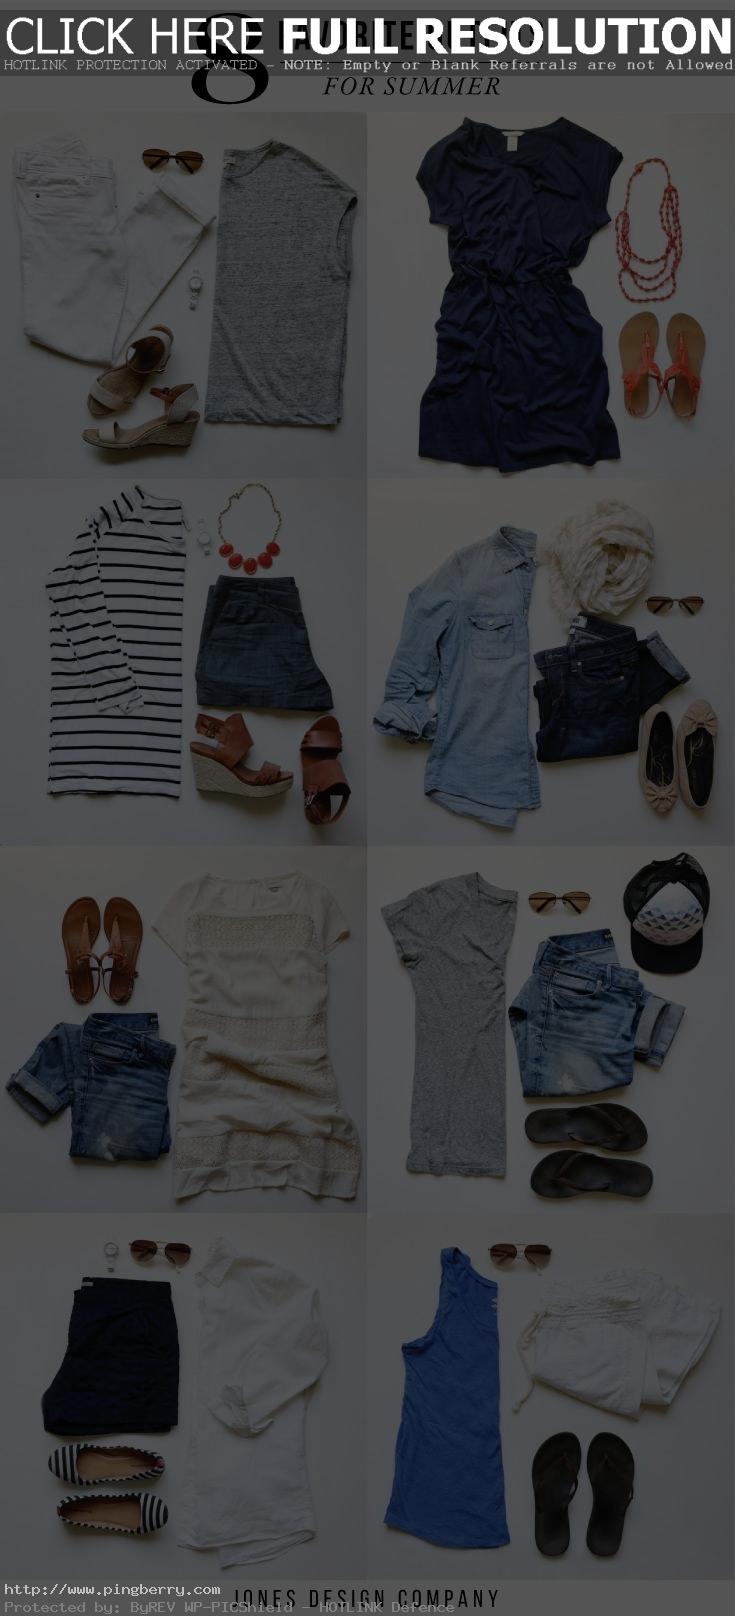 8 Favorite Outfits for Summer (with links for sources!) / jones design company...